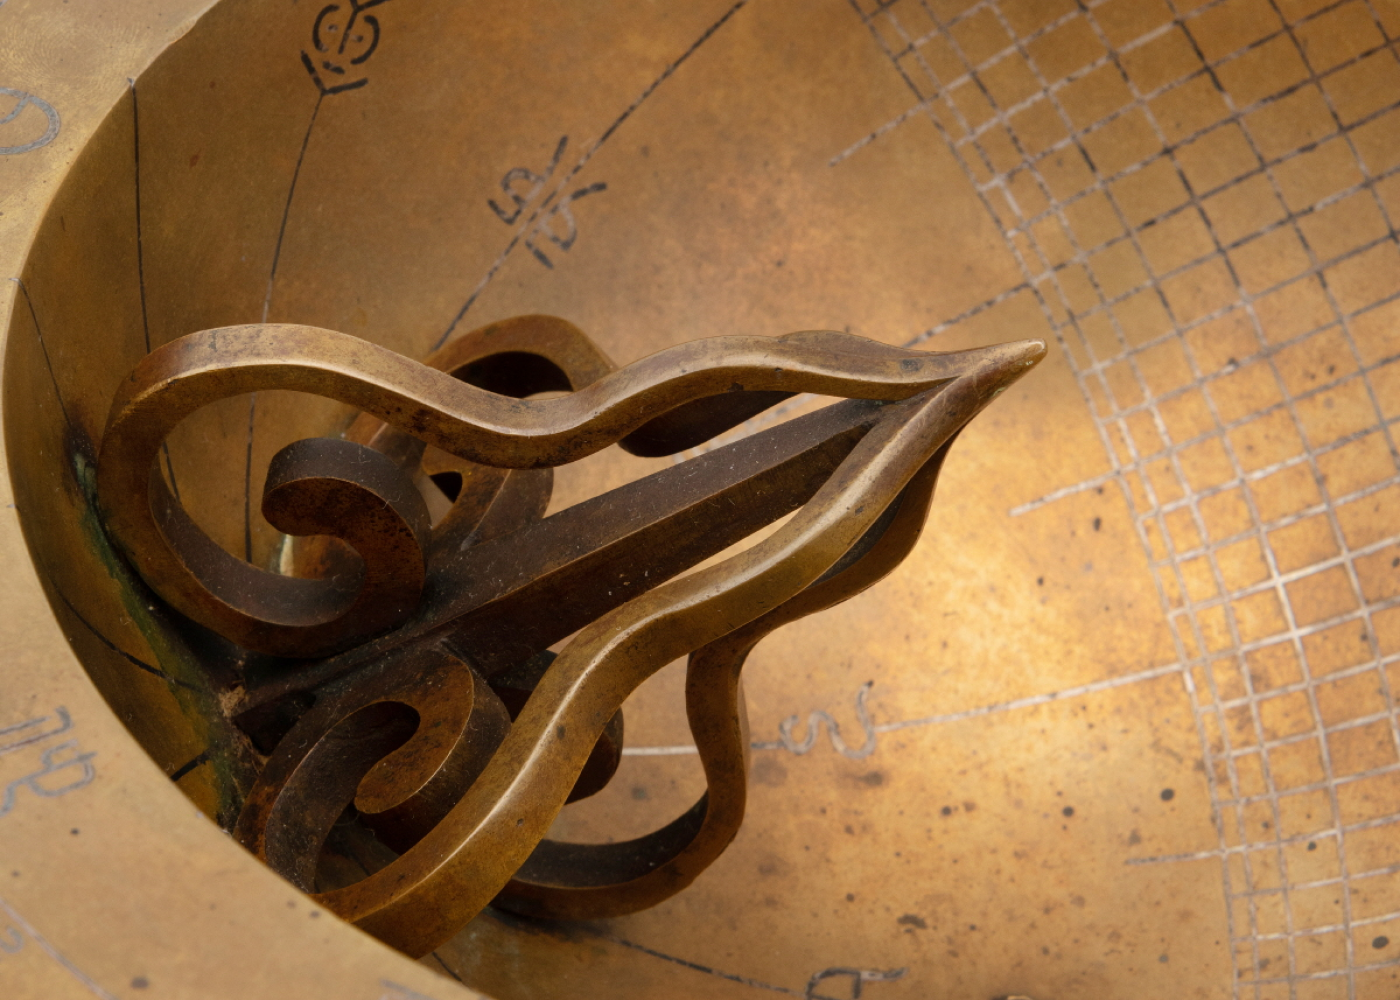 A closeup of the nebulous gnomon of the sundial which inspired our emblem. *Image source: Republic of Korea Cultural Heritage Administration.*